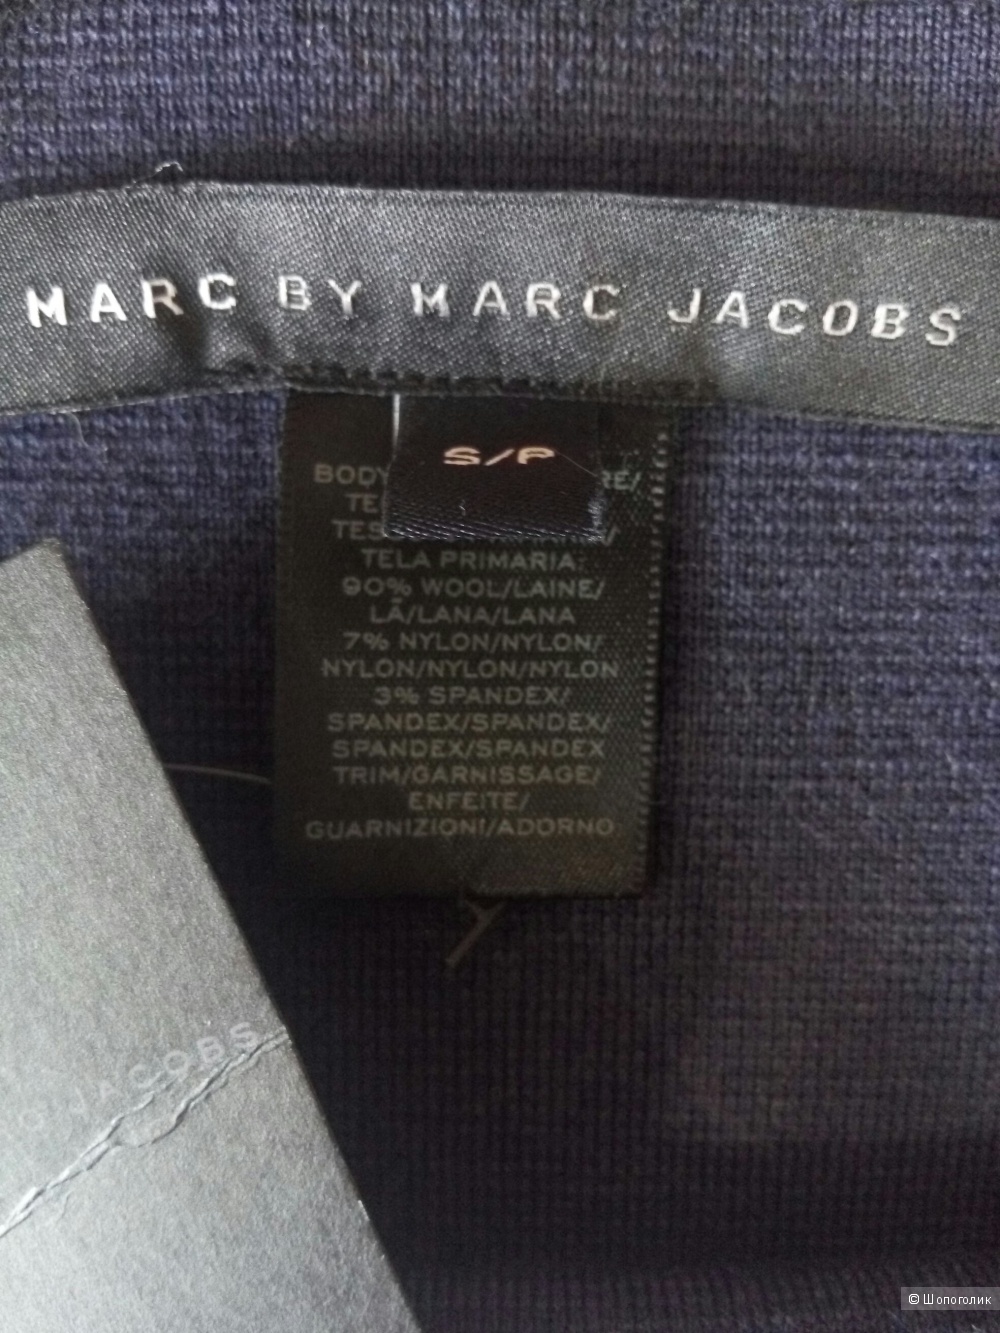 Сарафан Marc by Marc Jacobs р-р S/P (M).